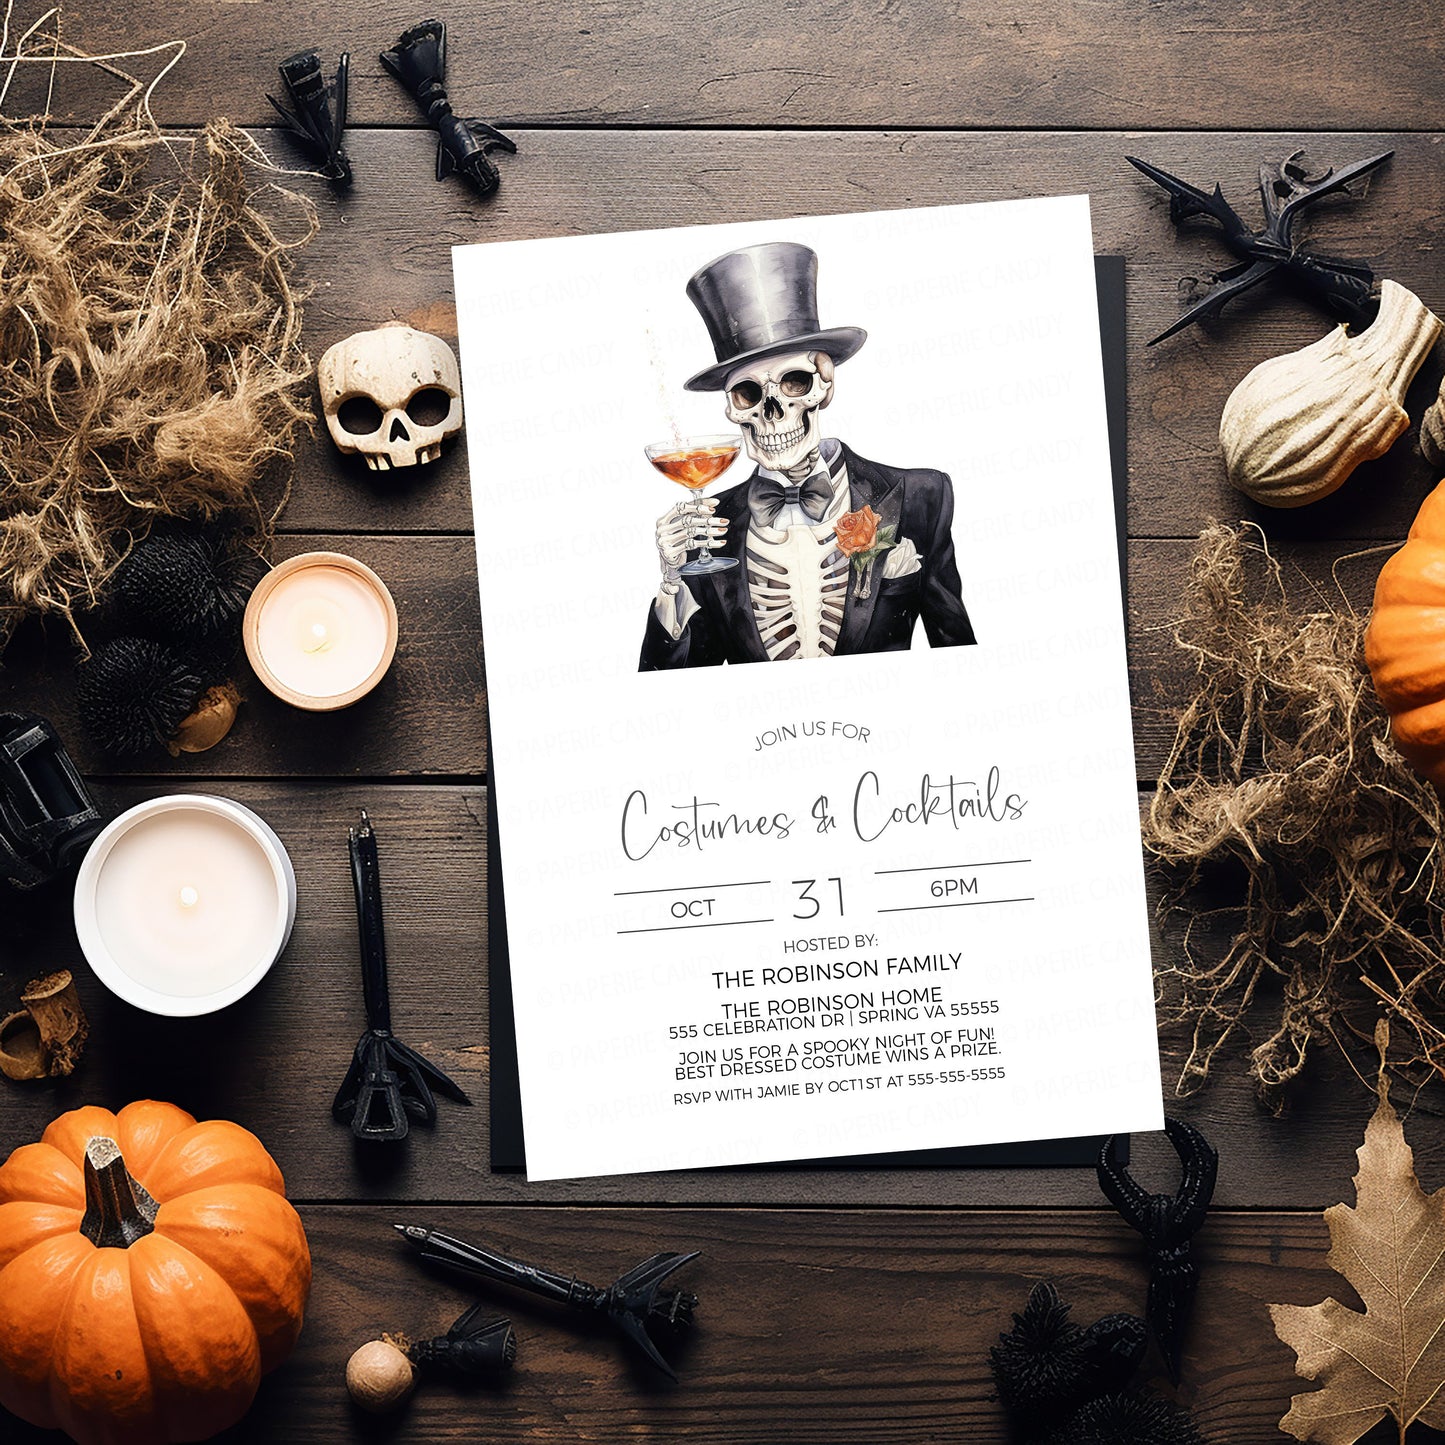 Halloween Costumes & Cocktails Invitation, Costume Party Invite, Costume Contest Dinner, Happy Hour Adult Party, Editable Printable